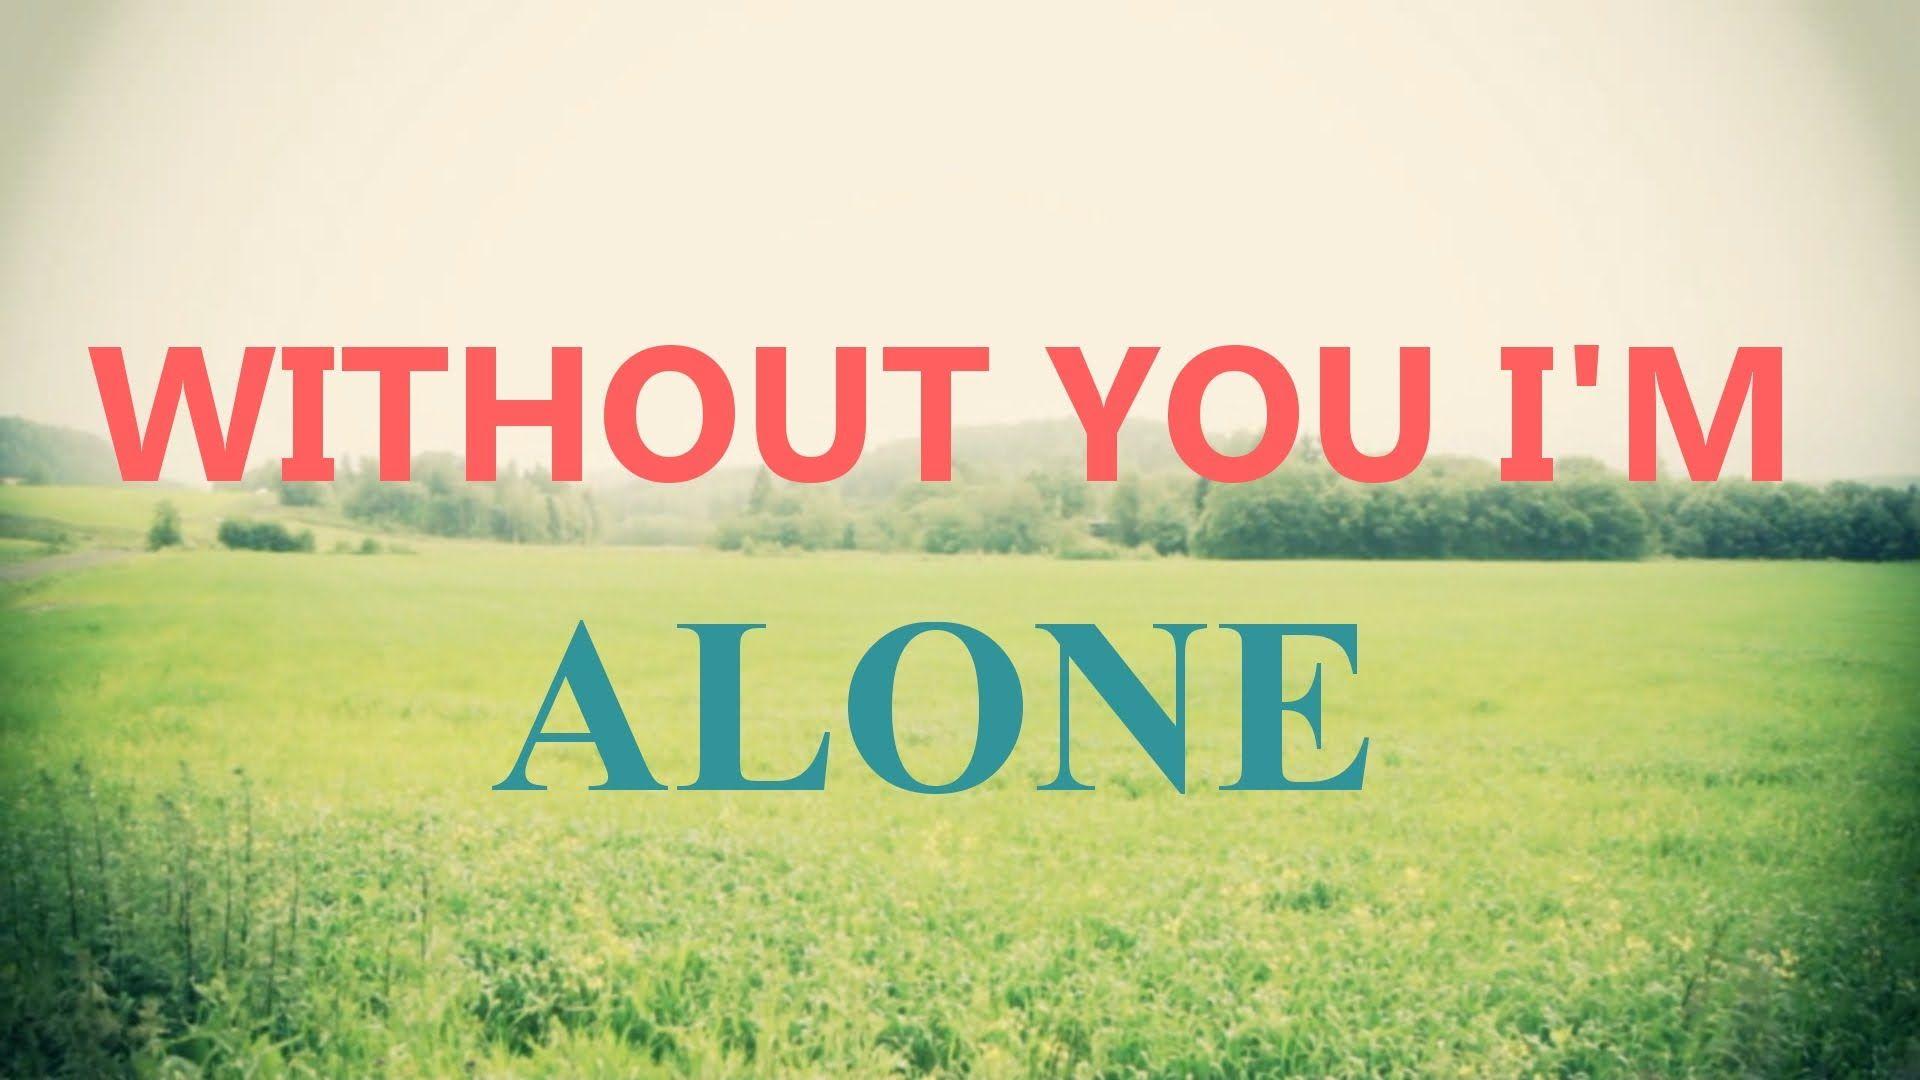 Without You I'm Alone B. Helland [Music Video]